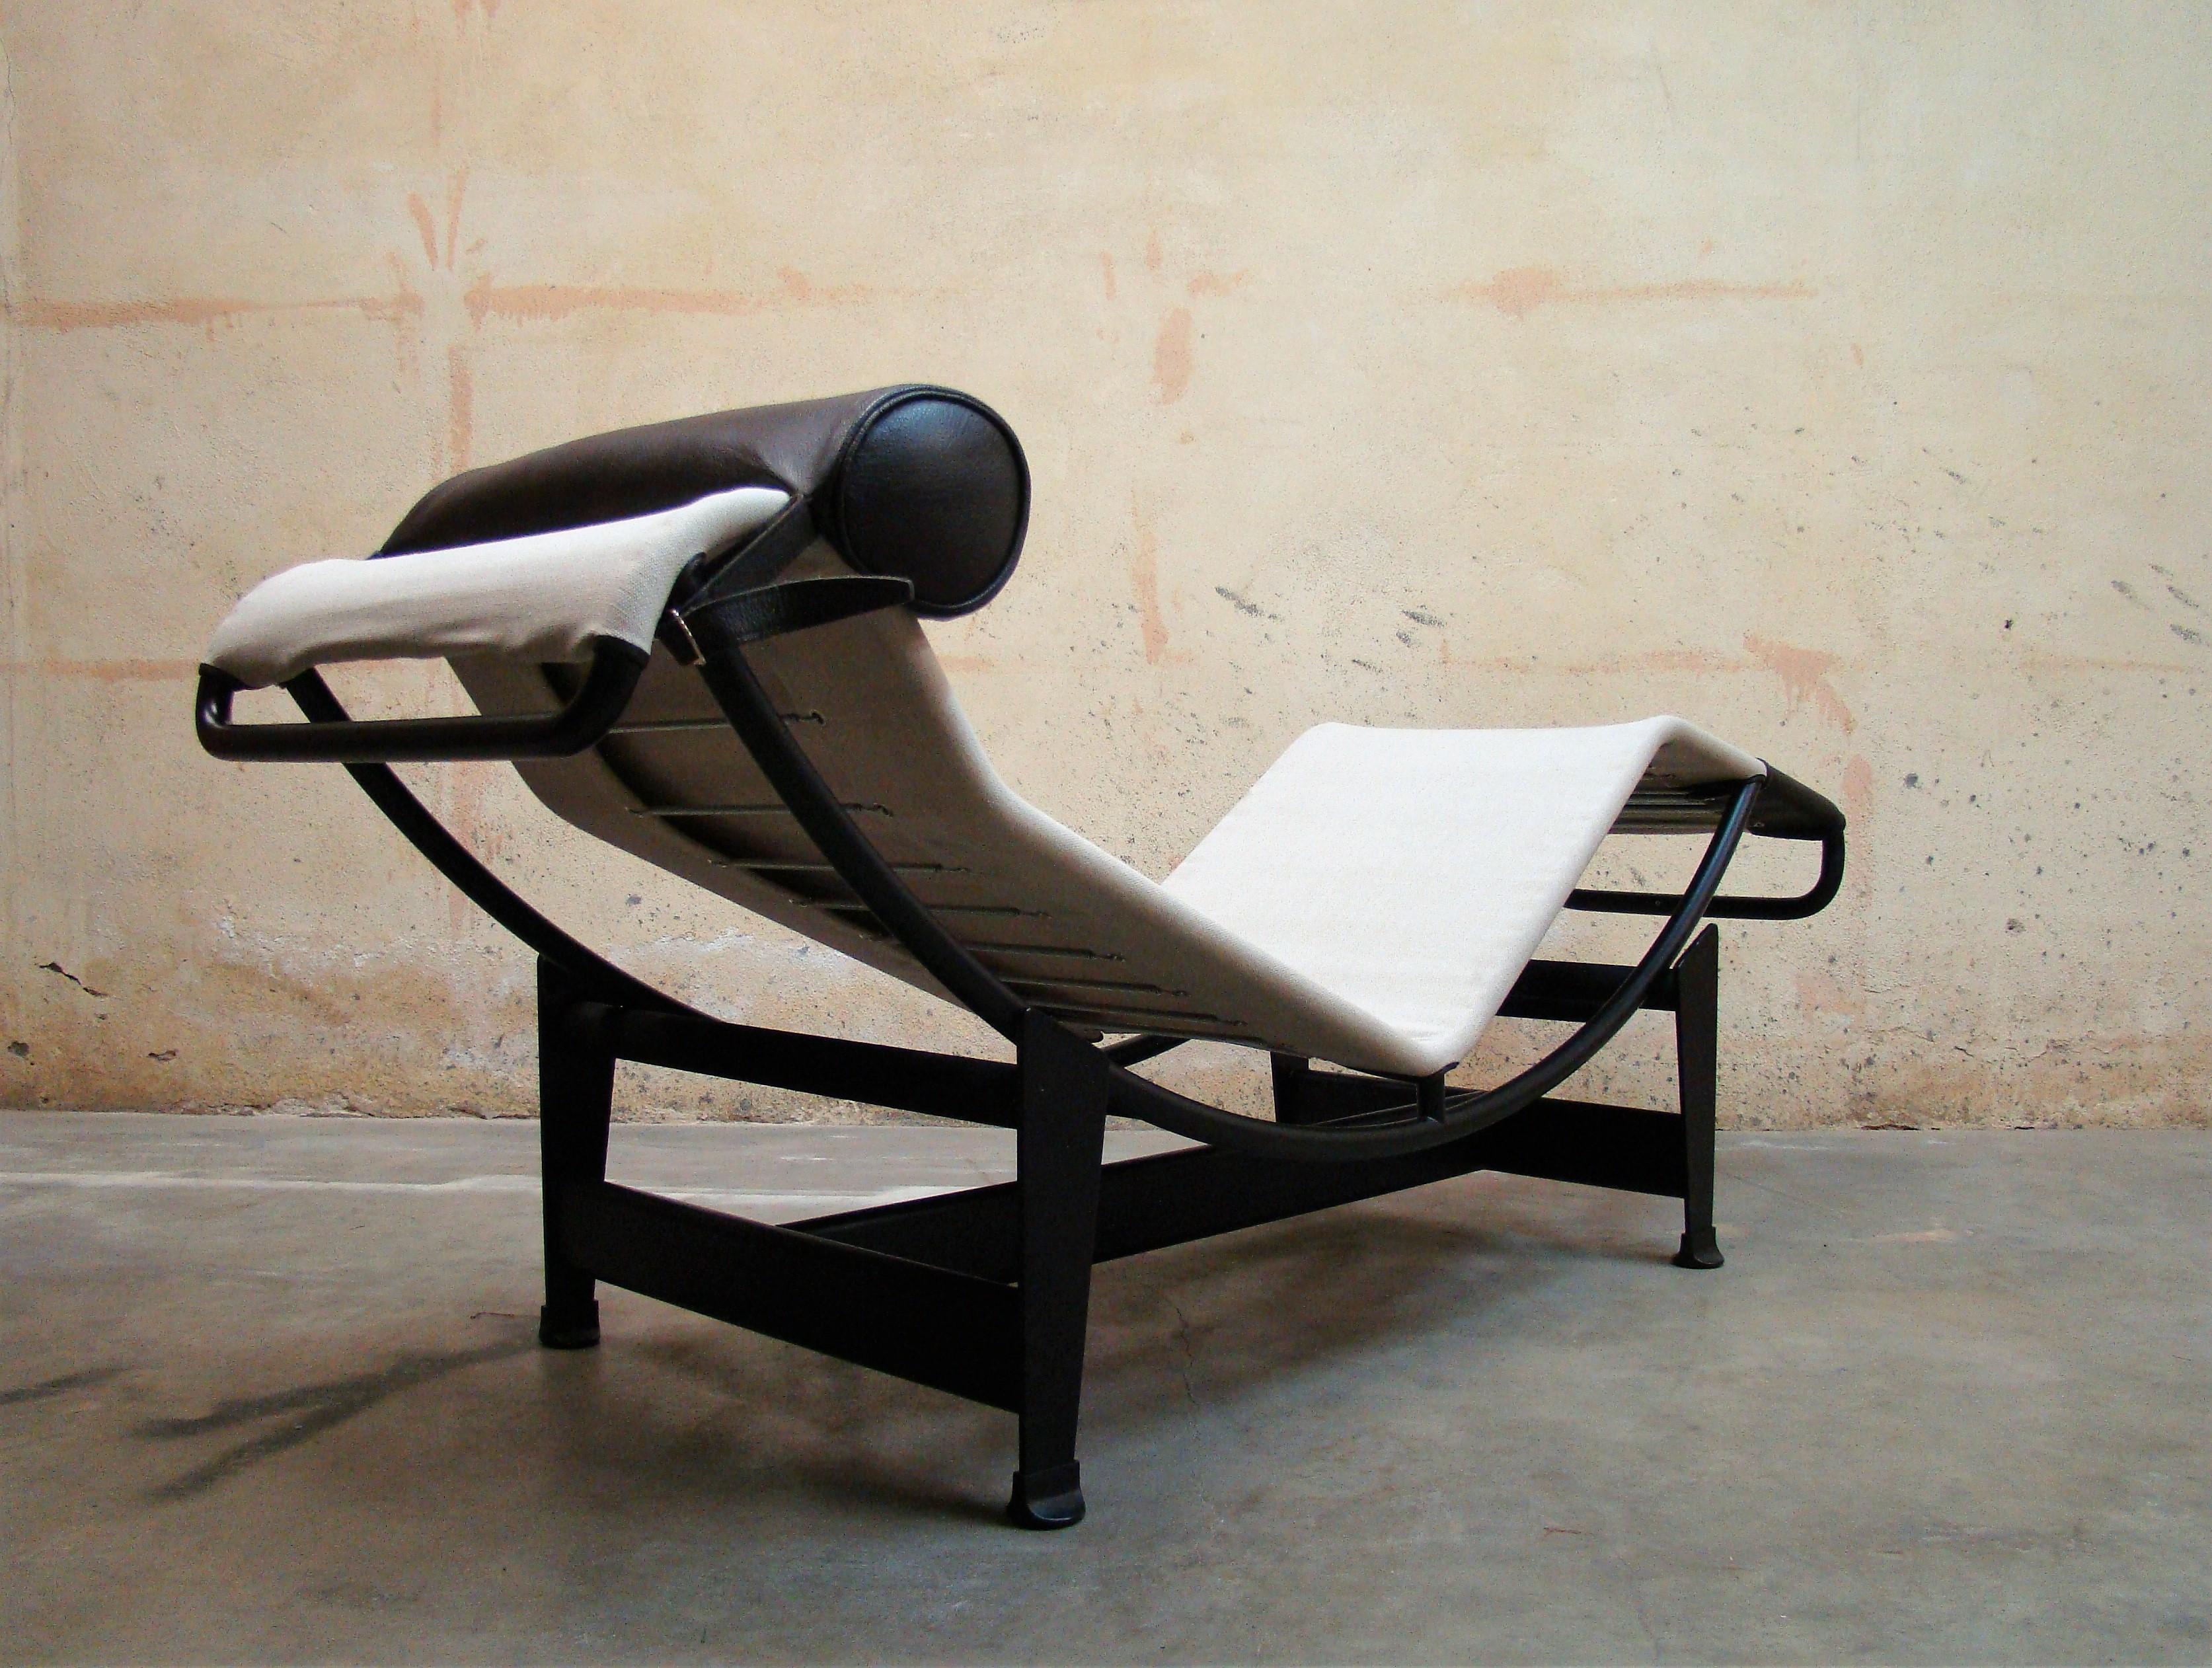 Designed by Le Corbusier, Pierre Jeanneret and Charlotte Perriand in 1928 and produced since 1965 by Cassina, LC4 is a chaise lounge with infinitely variable inclination. This later variation has the subdued powder-coated seat frame and black